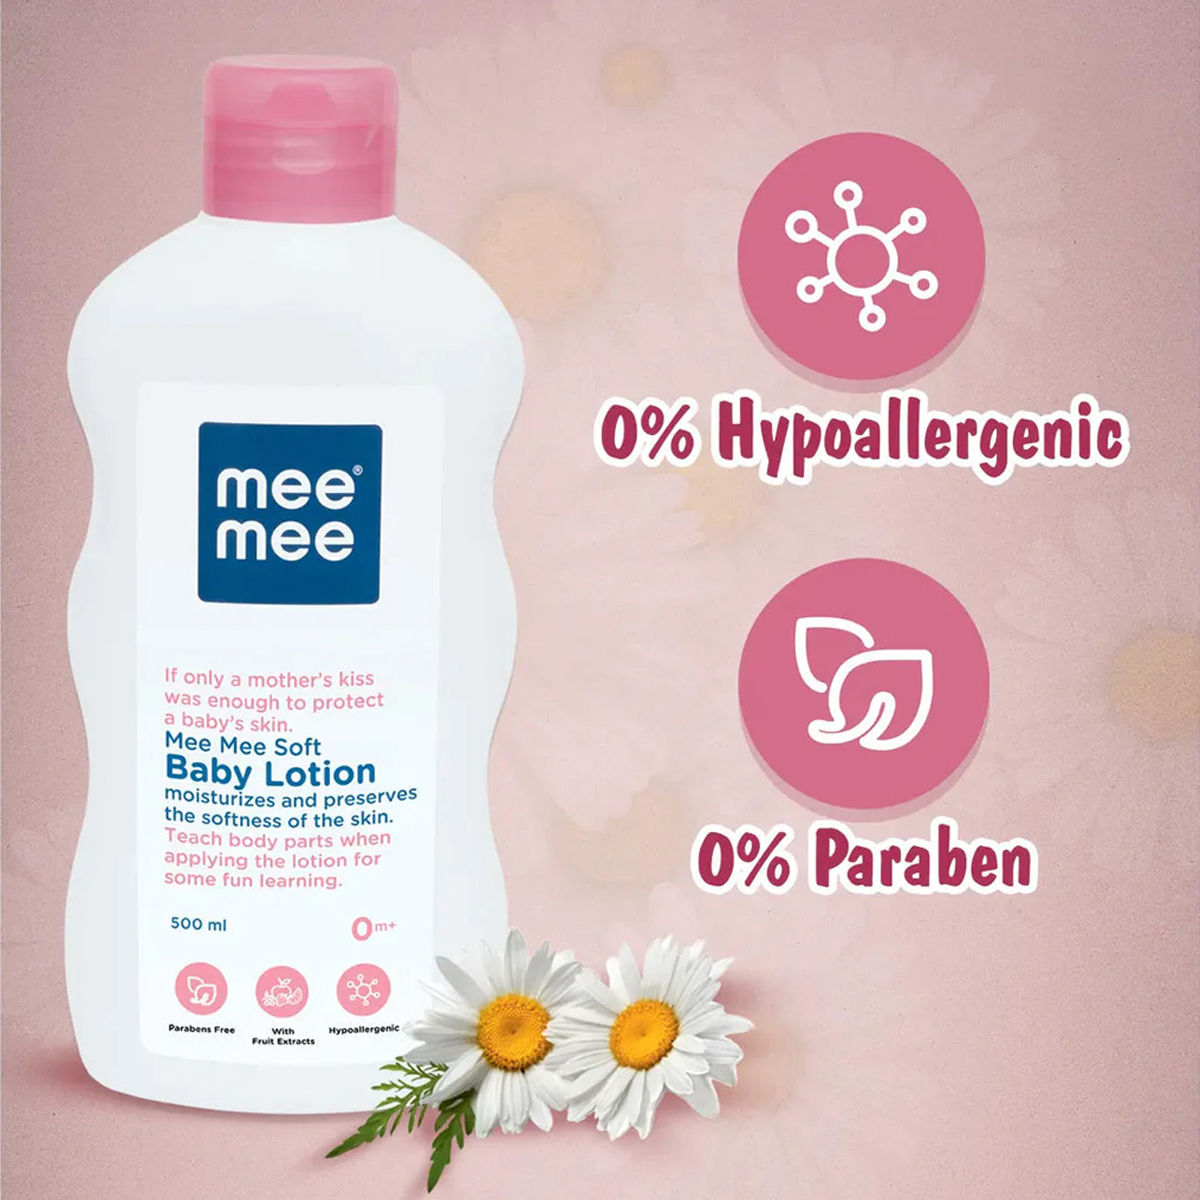 Mee Mee Soft Moisturizing Baby Lotion, 100 ml, Pack of 1 